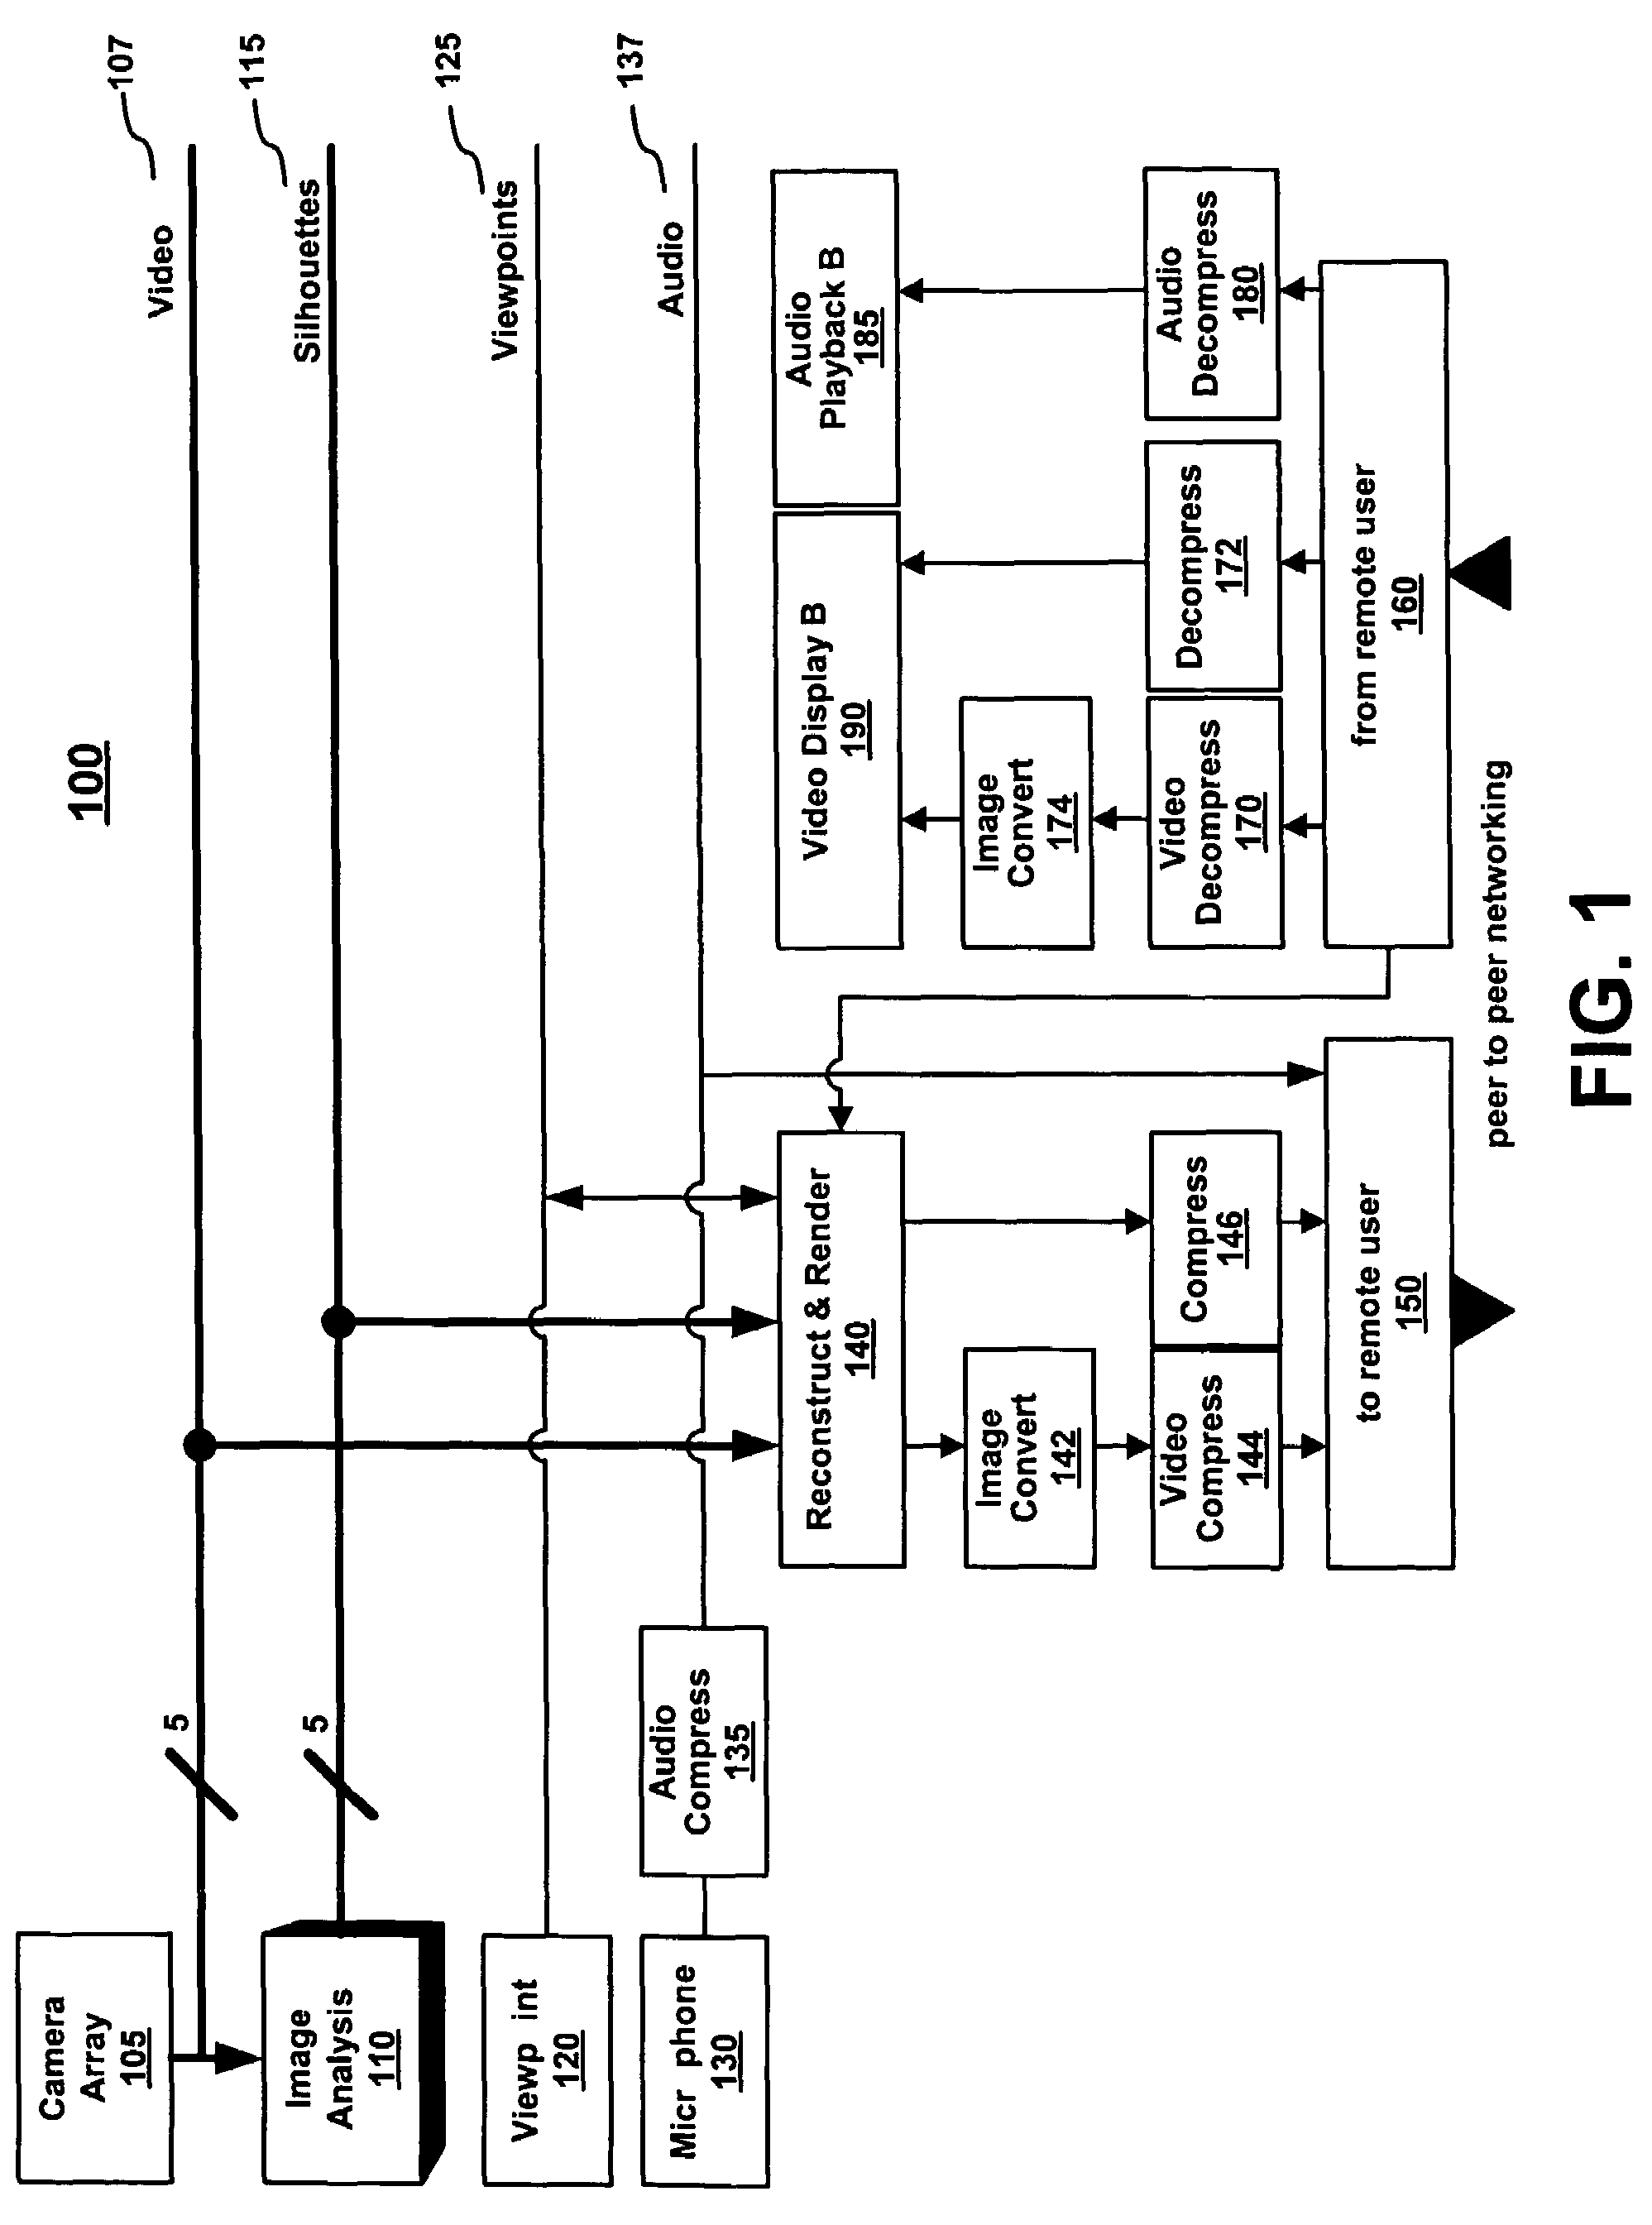 Method and system for real-time rendering within a gaming environment